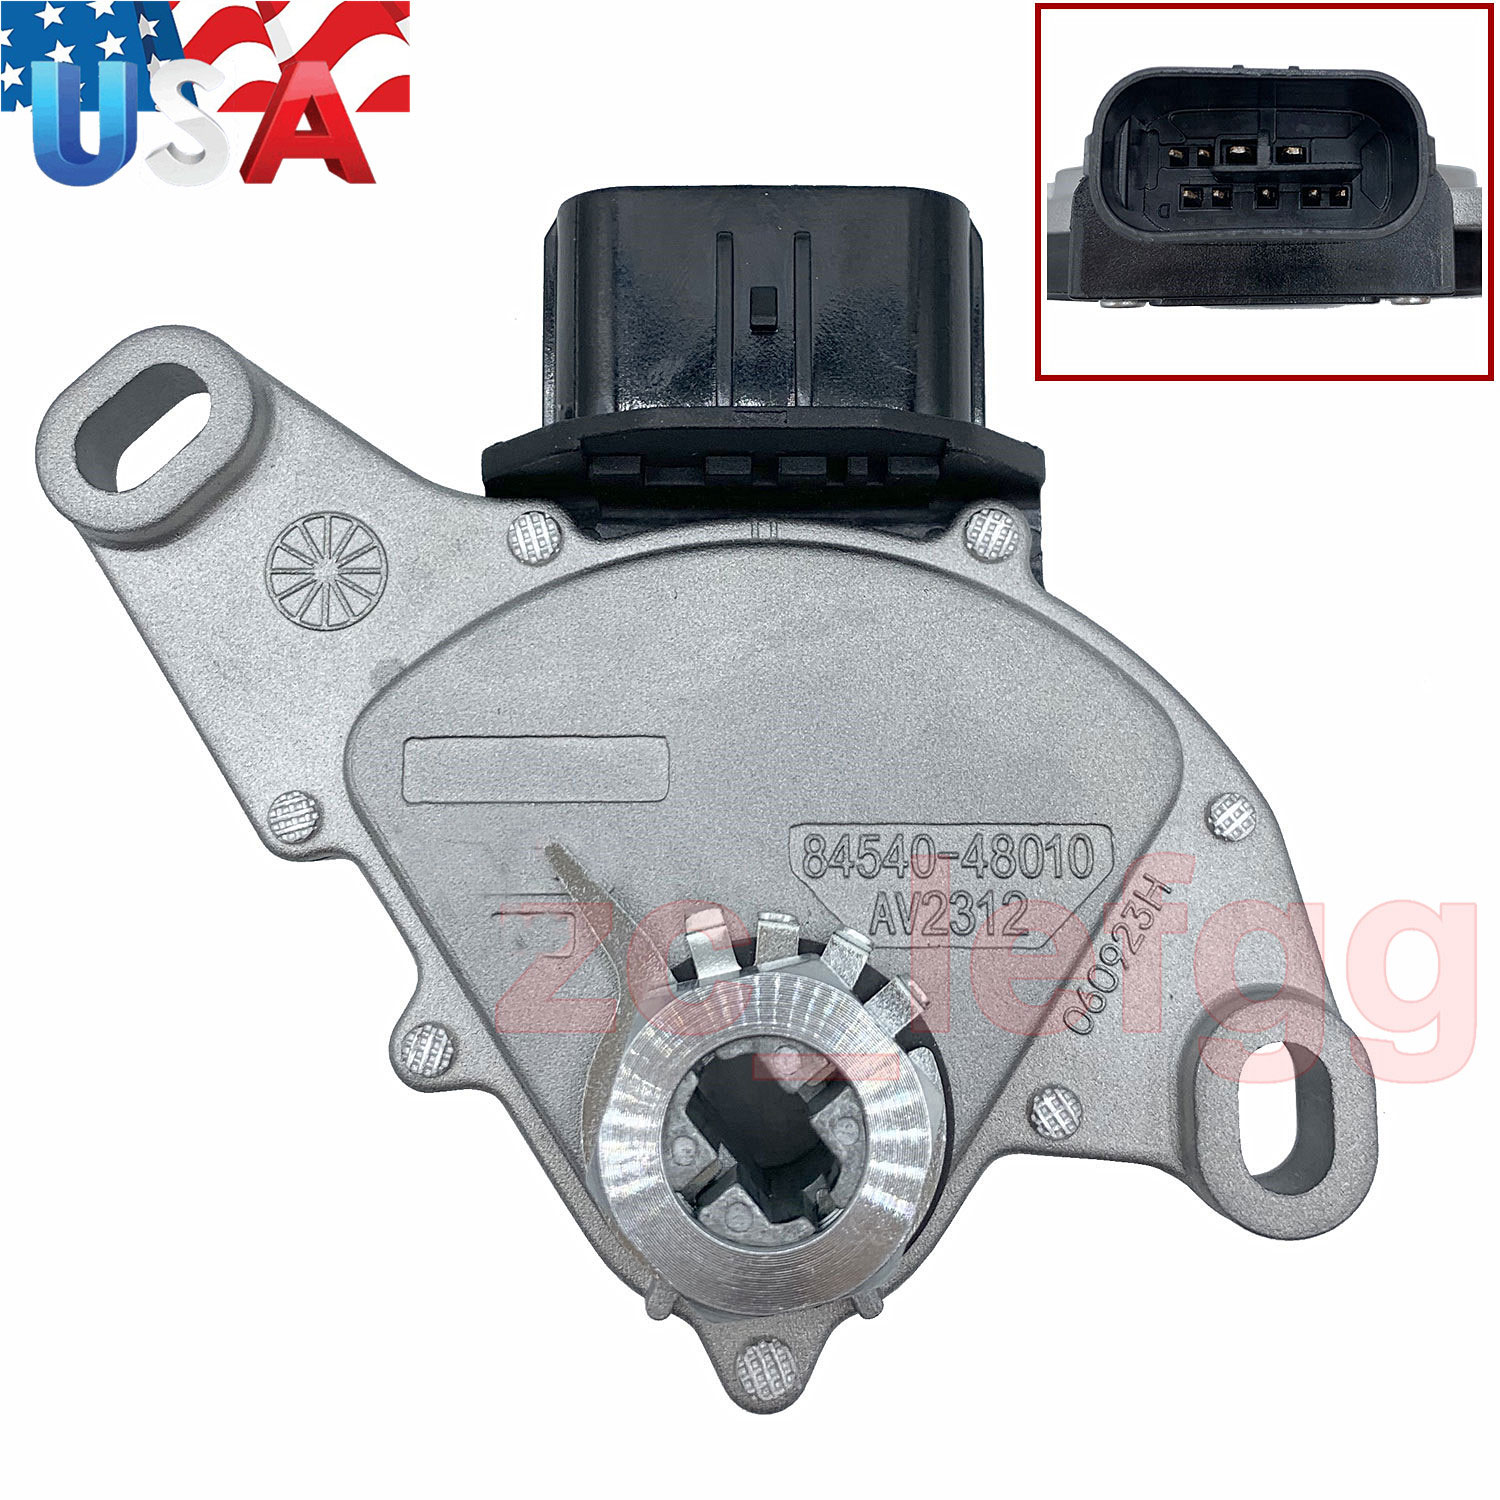 84540-48010 Safety Switch Fits For Toyota Camry Corolla Matrix Scion xB Lexus